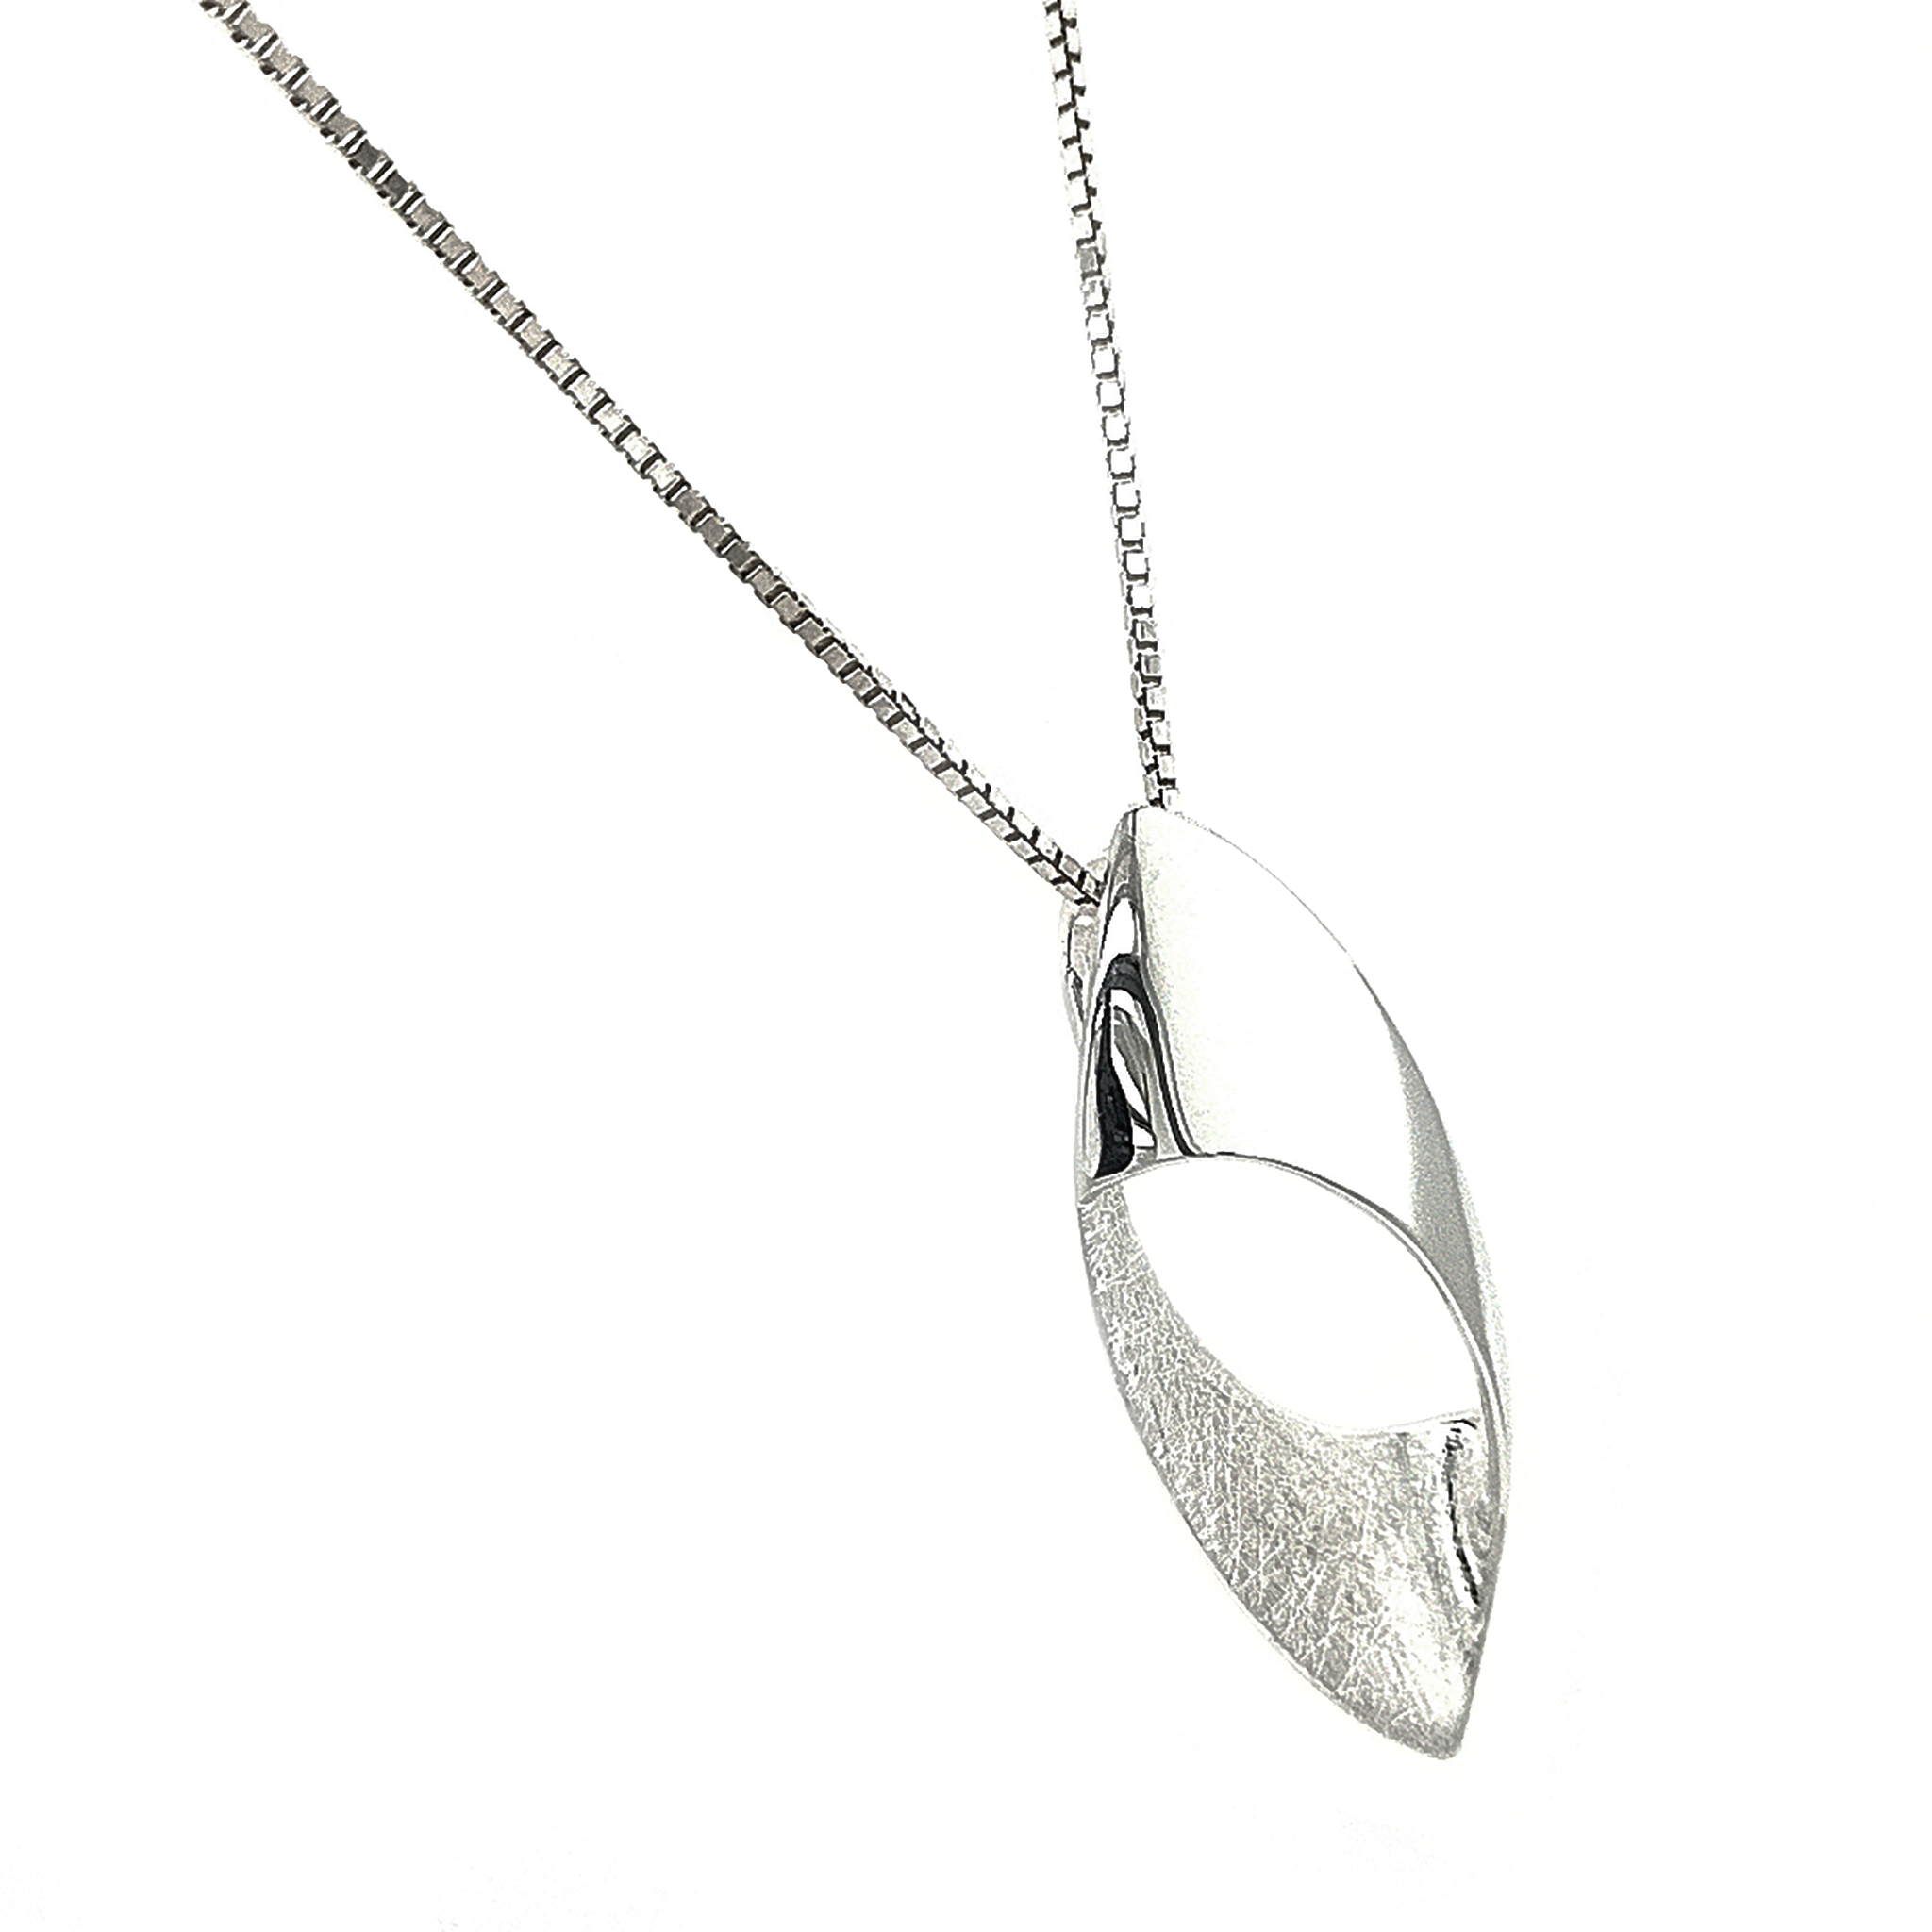 Silver Moonglade Pendant & Chain